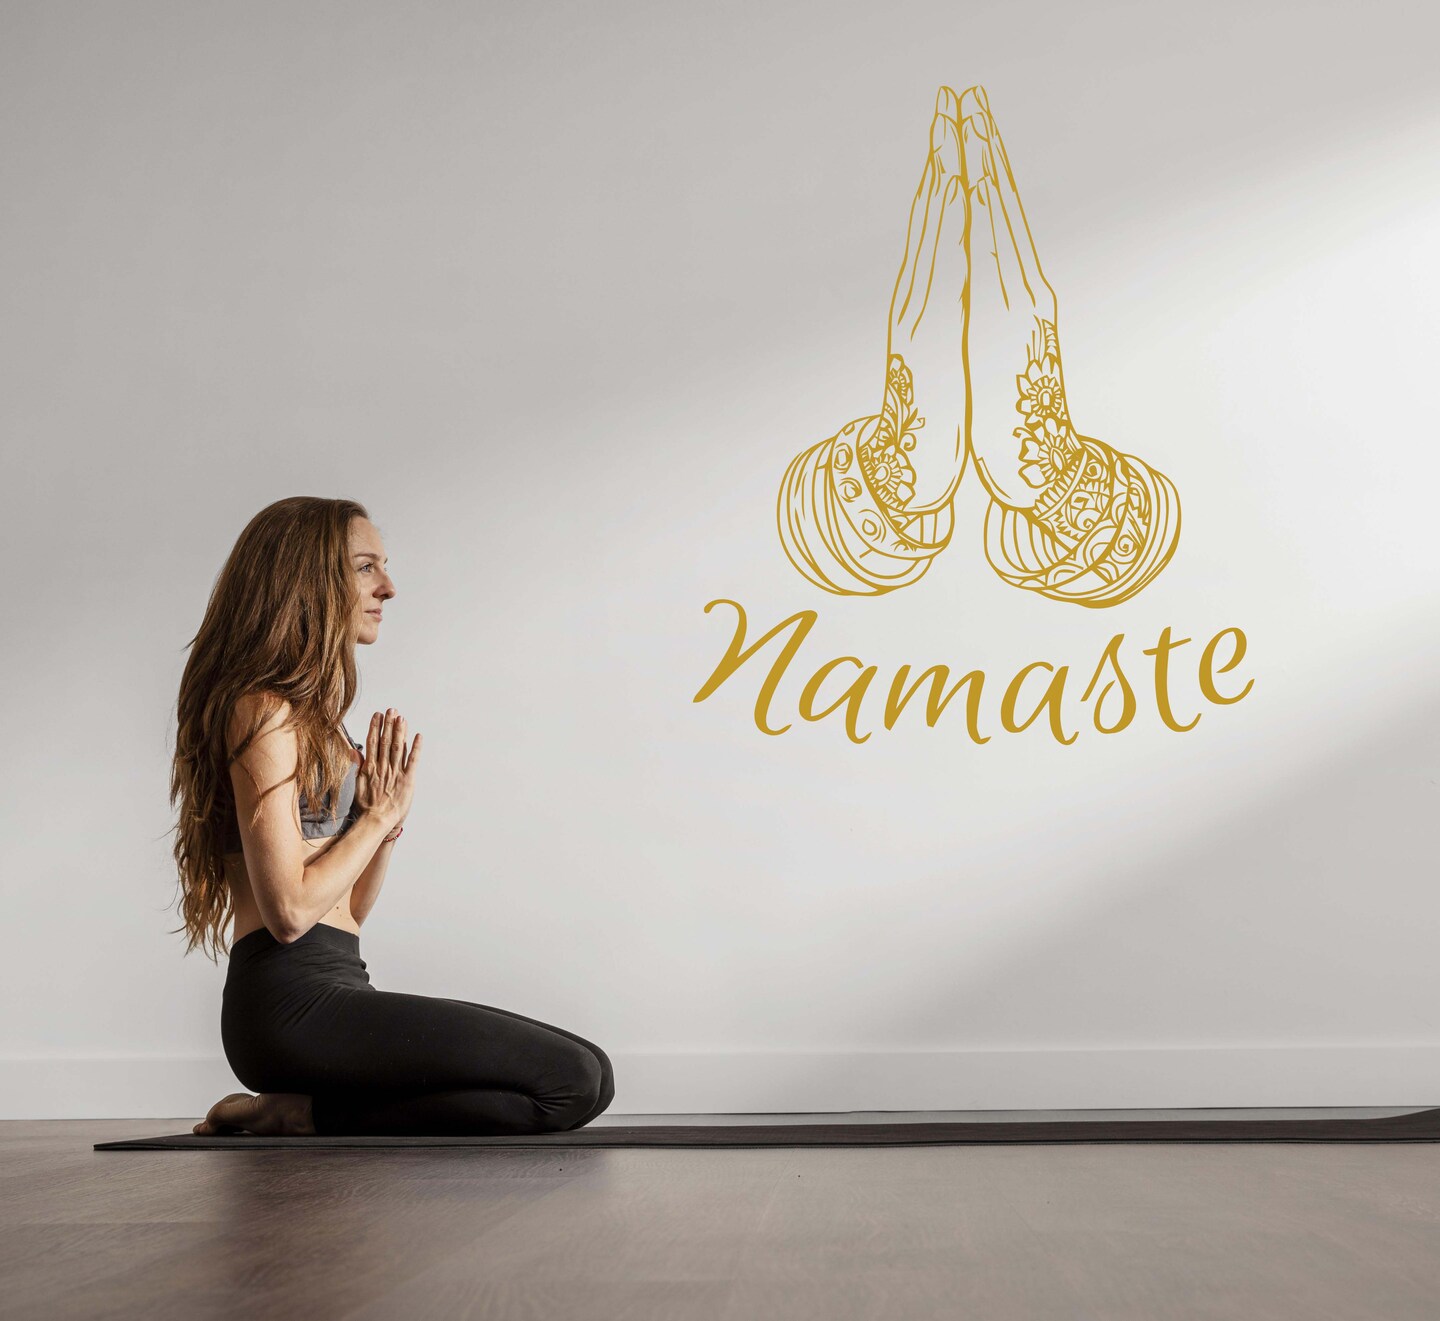 Namaste Yoga Symbol Black and White Hands Pullover Hoodie for